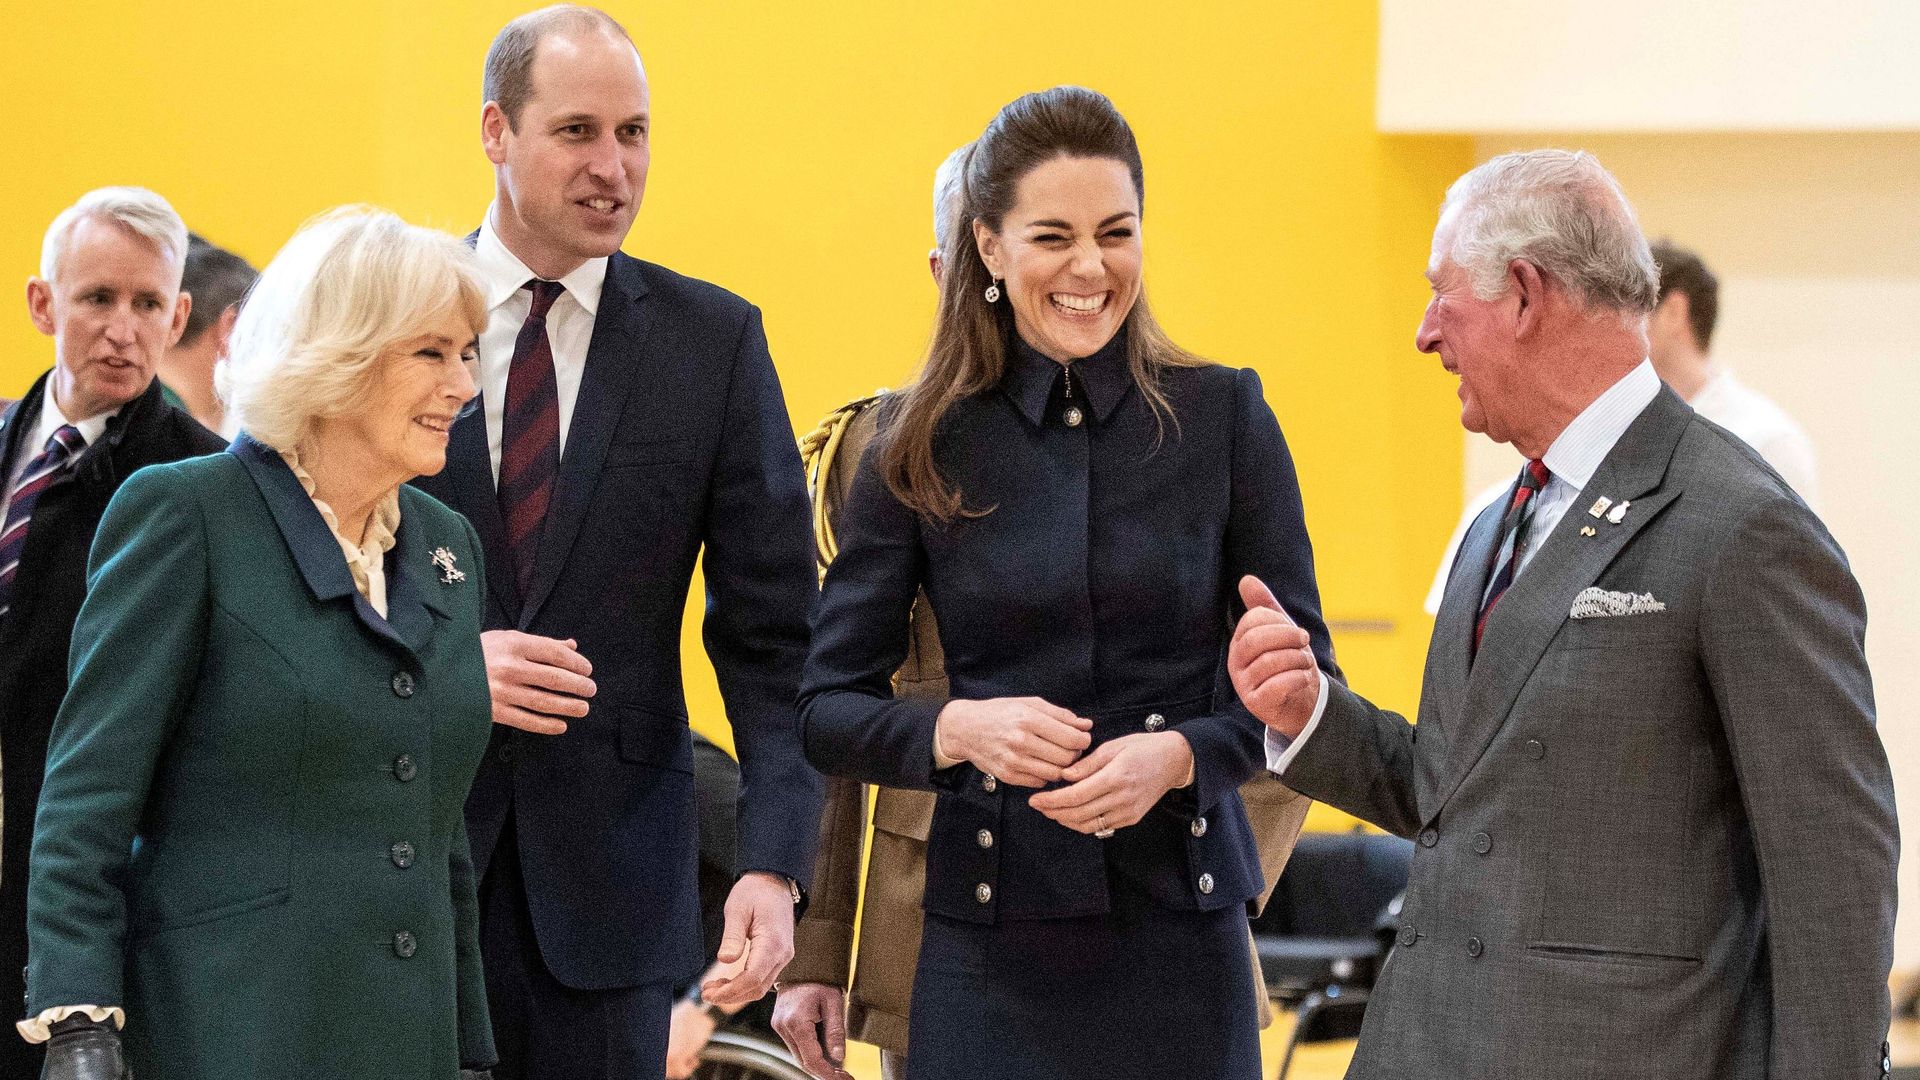 William, Kate, Charles and Camilla in Loughborough